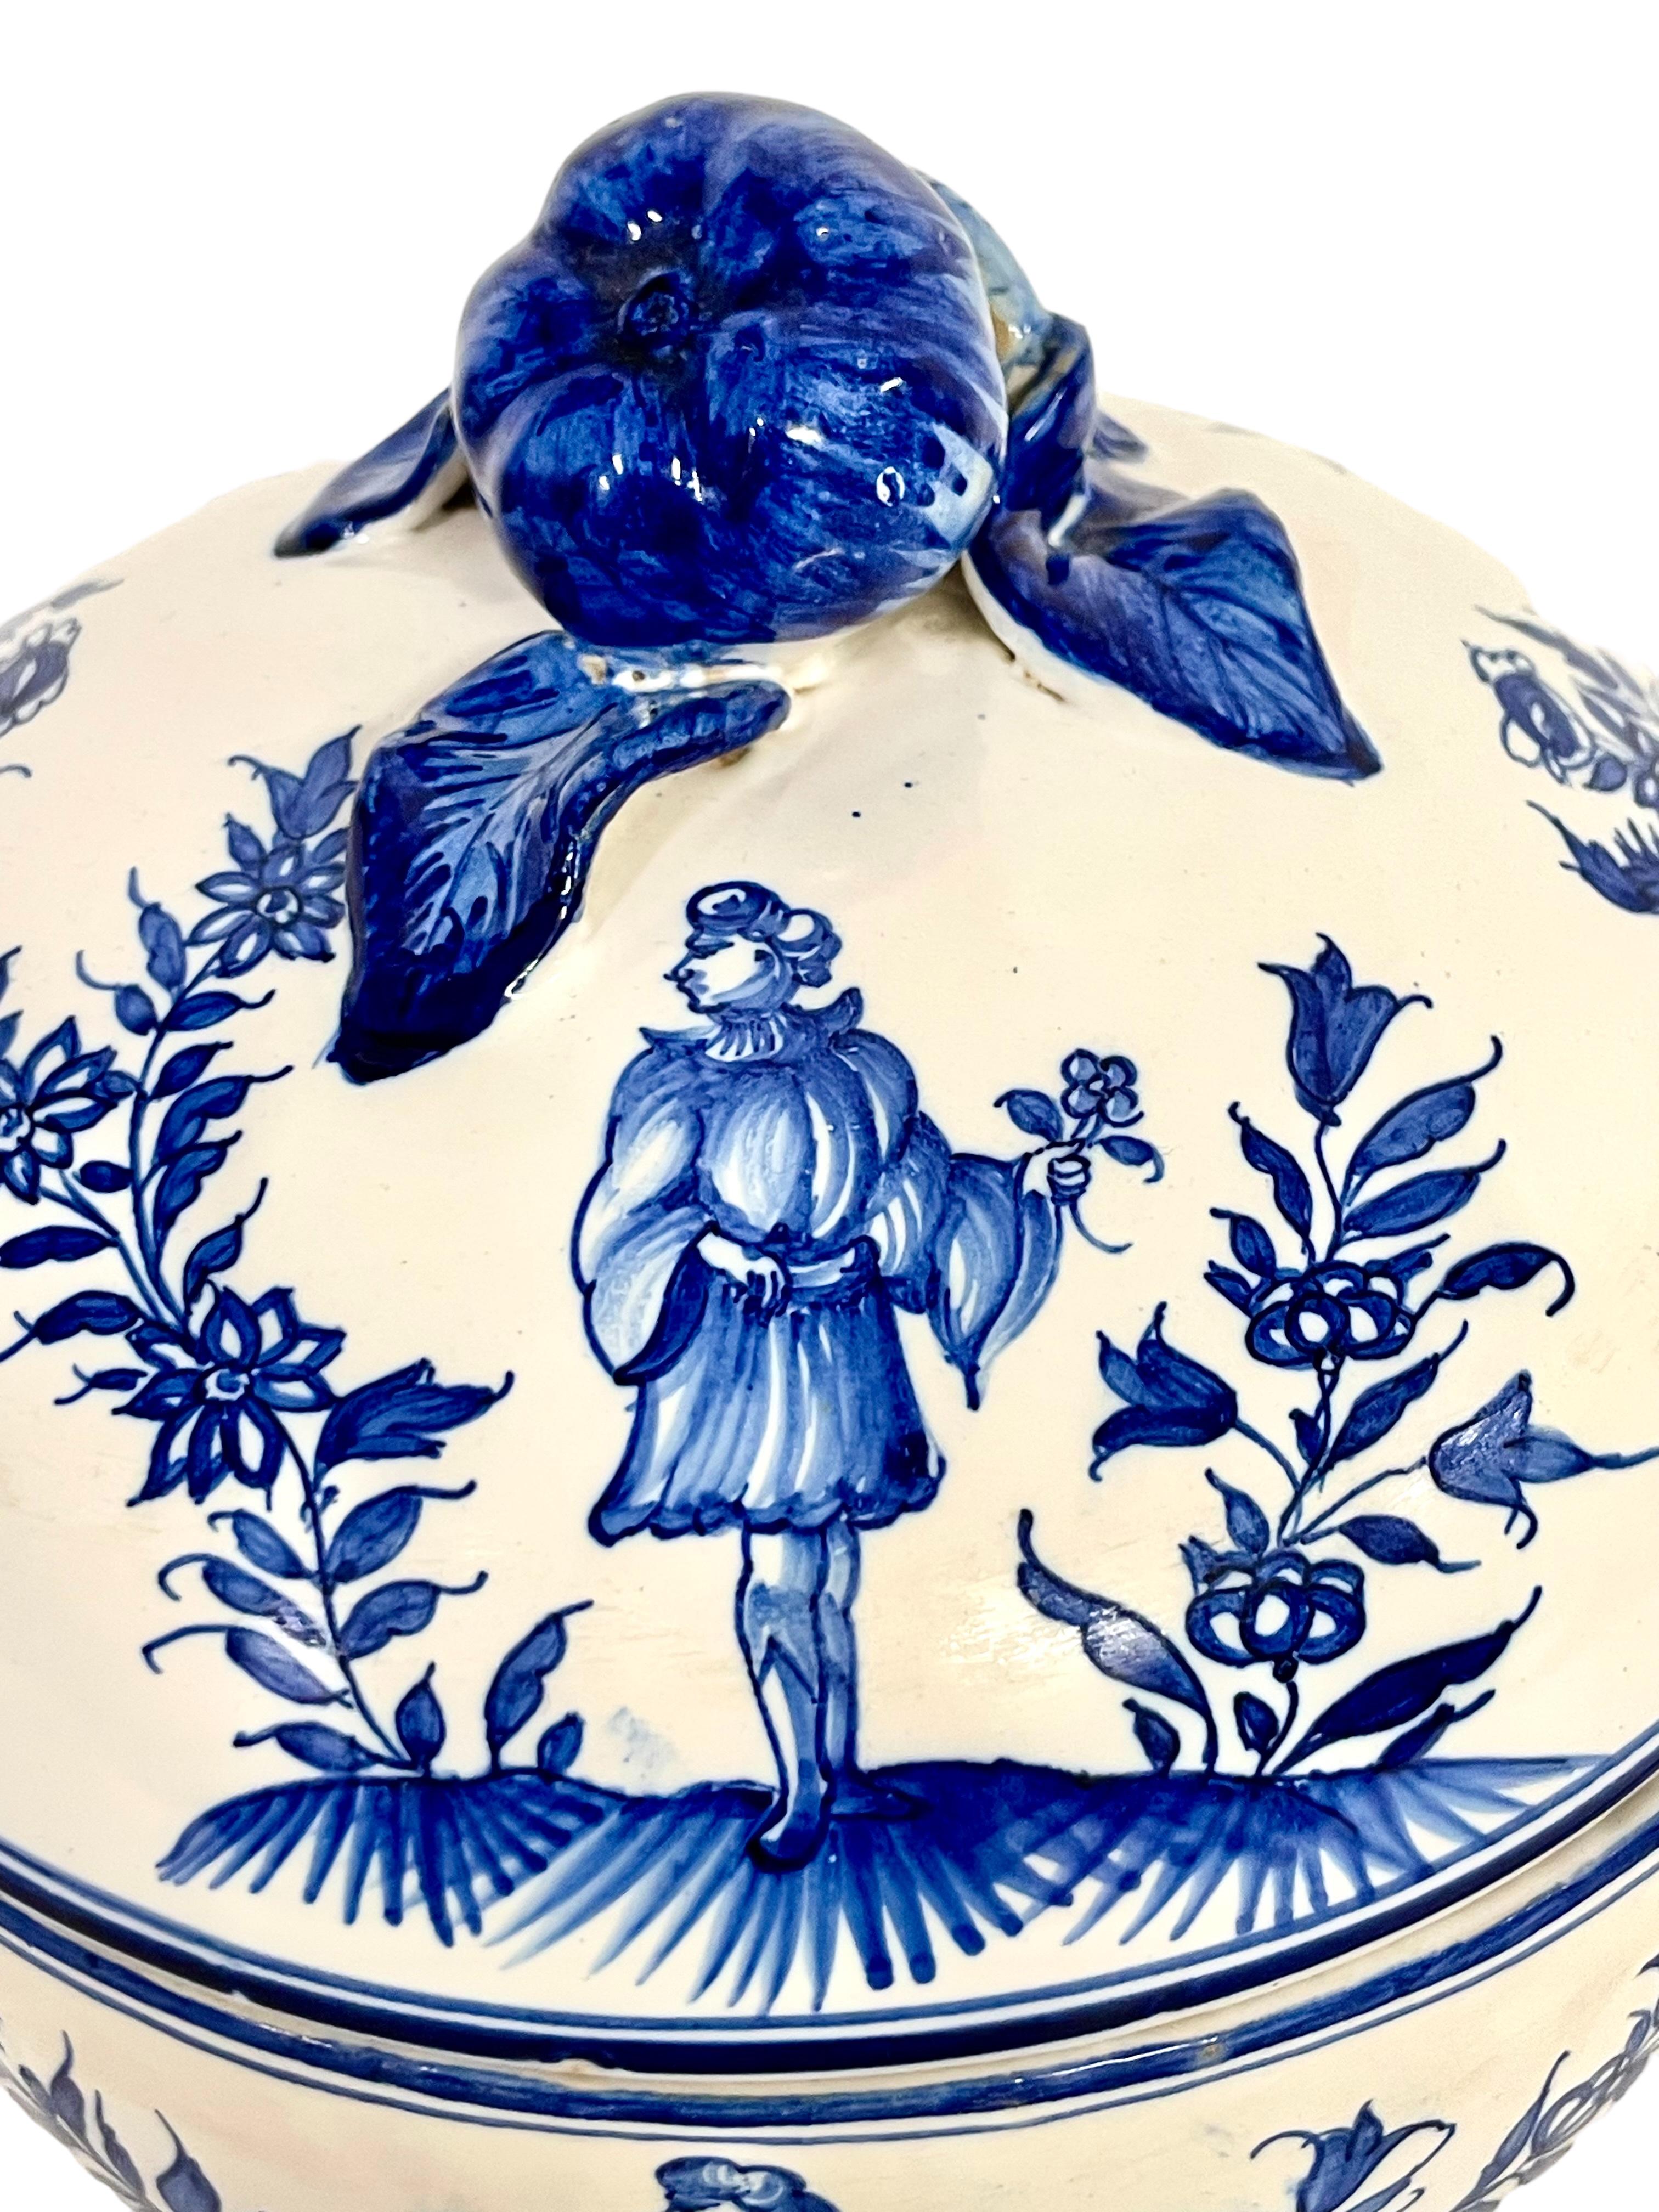 Blue and White Earthenware Lidded Tureen with Fantastical Decoration For Sale 6